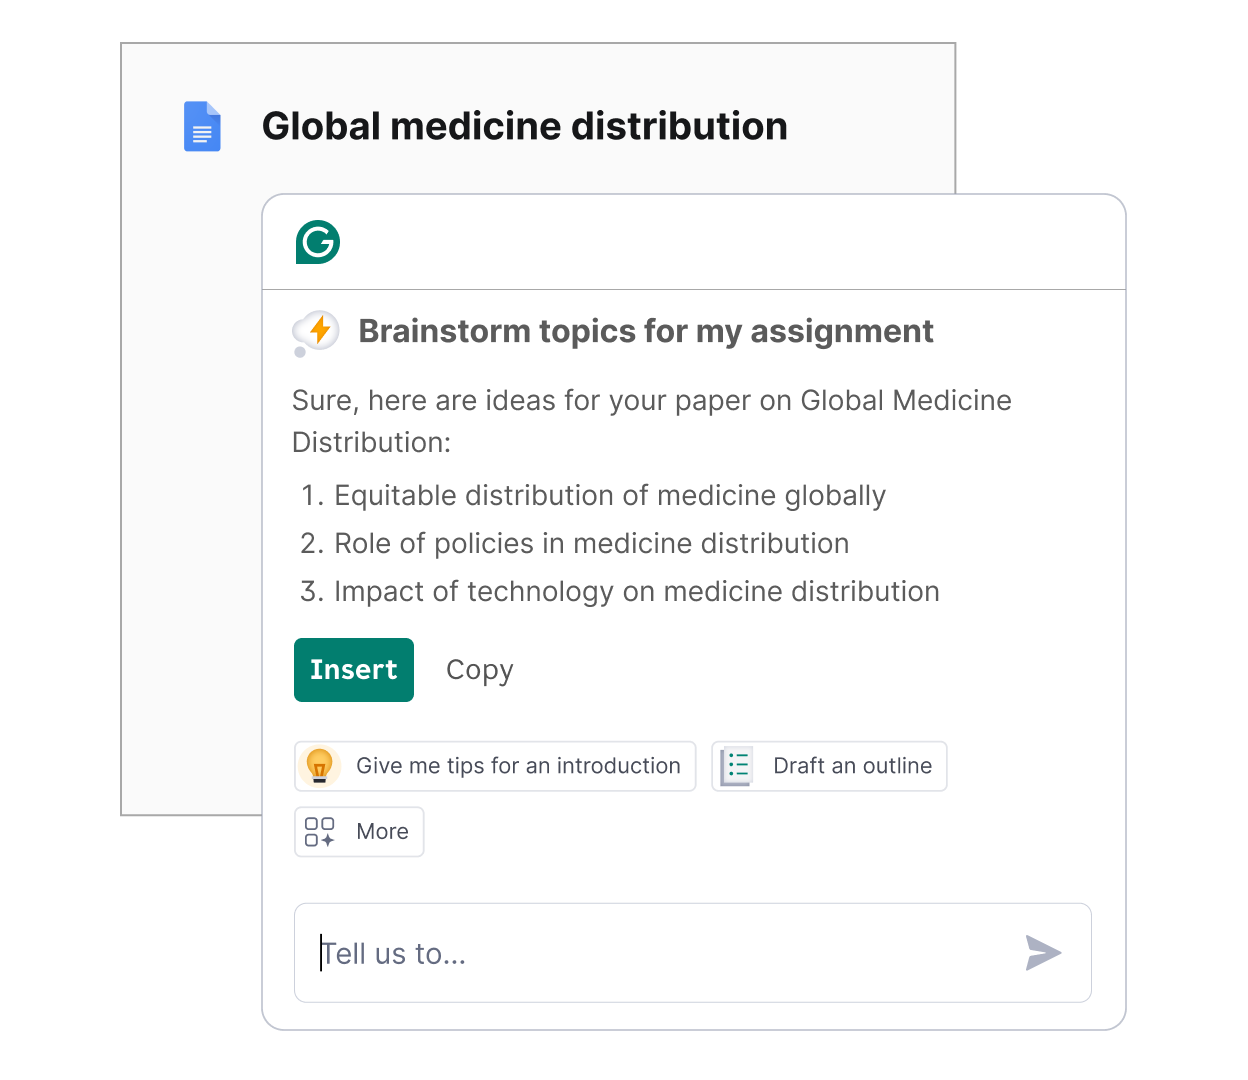 Grammarly product example shows brainstorming topics for your assignment